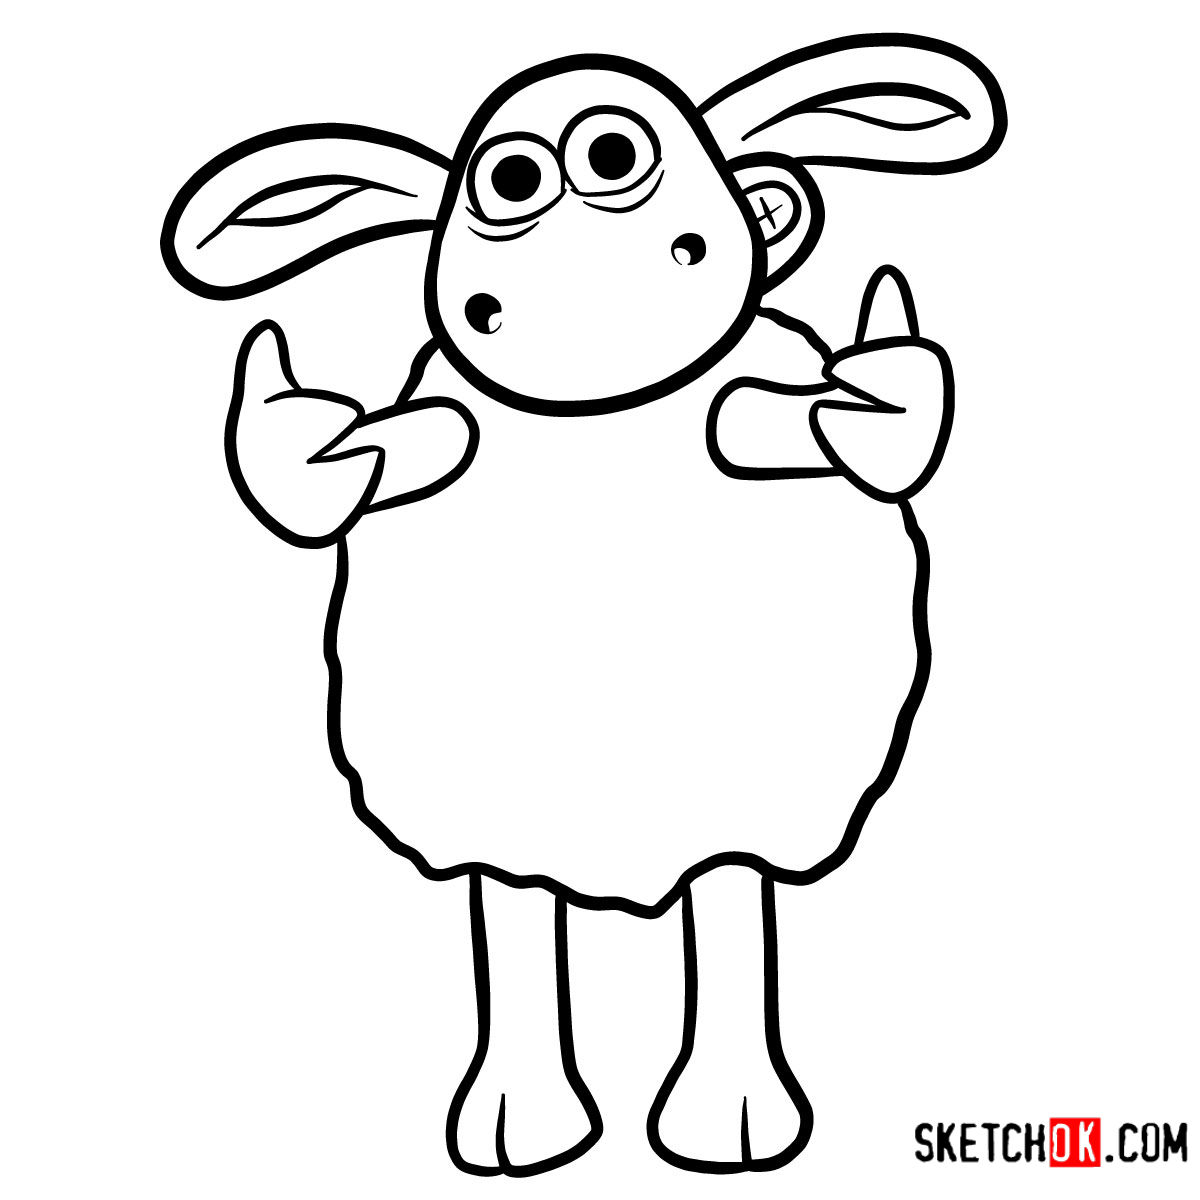 How to draw Timmy | Shaun the Sheep